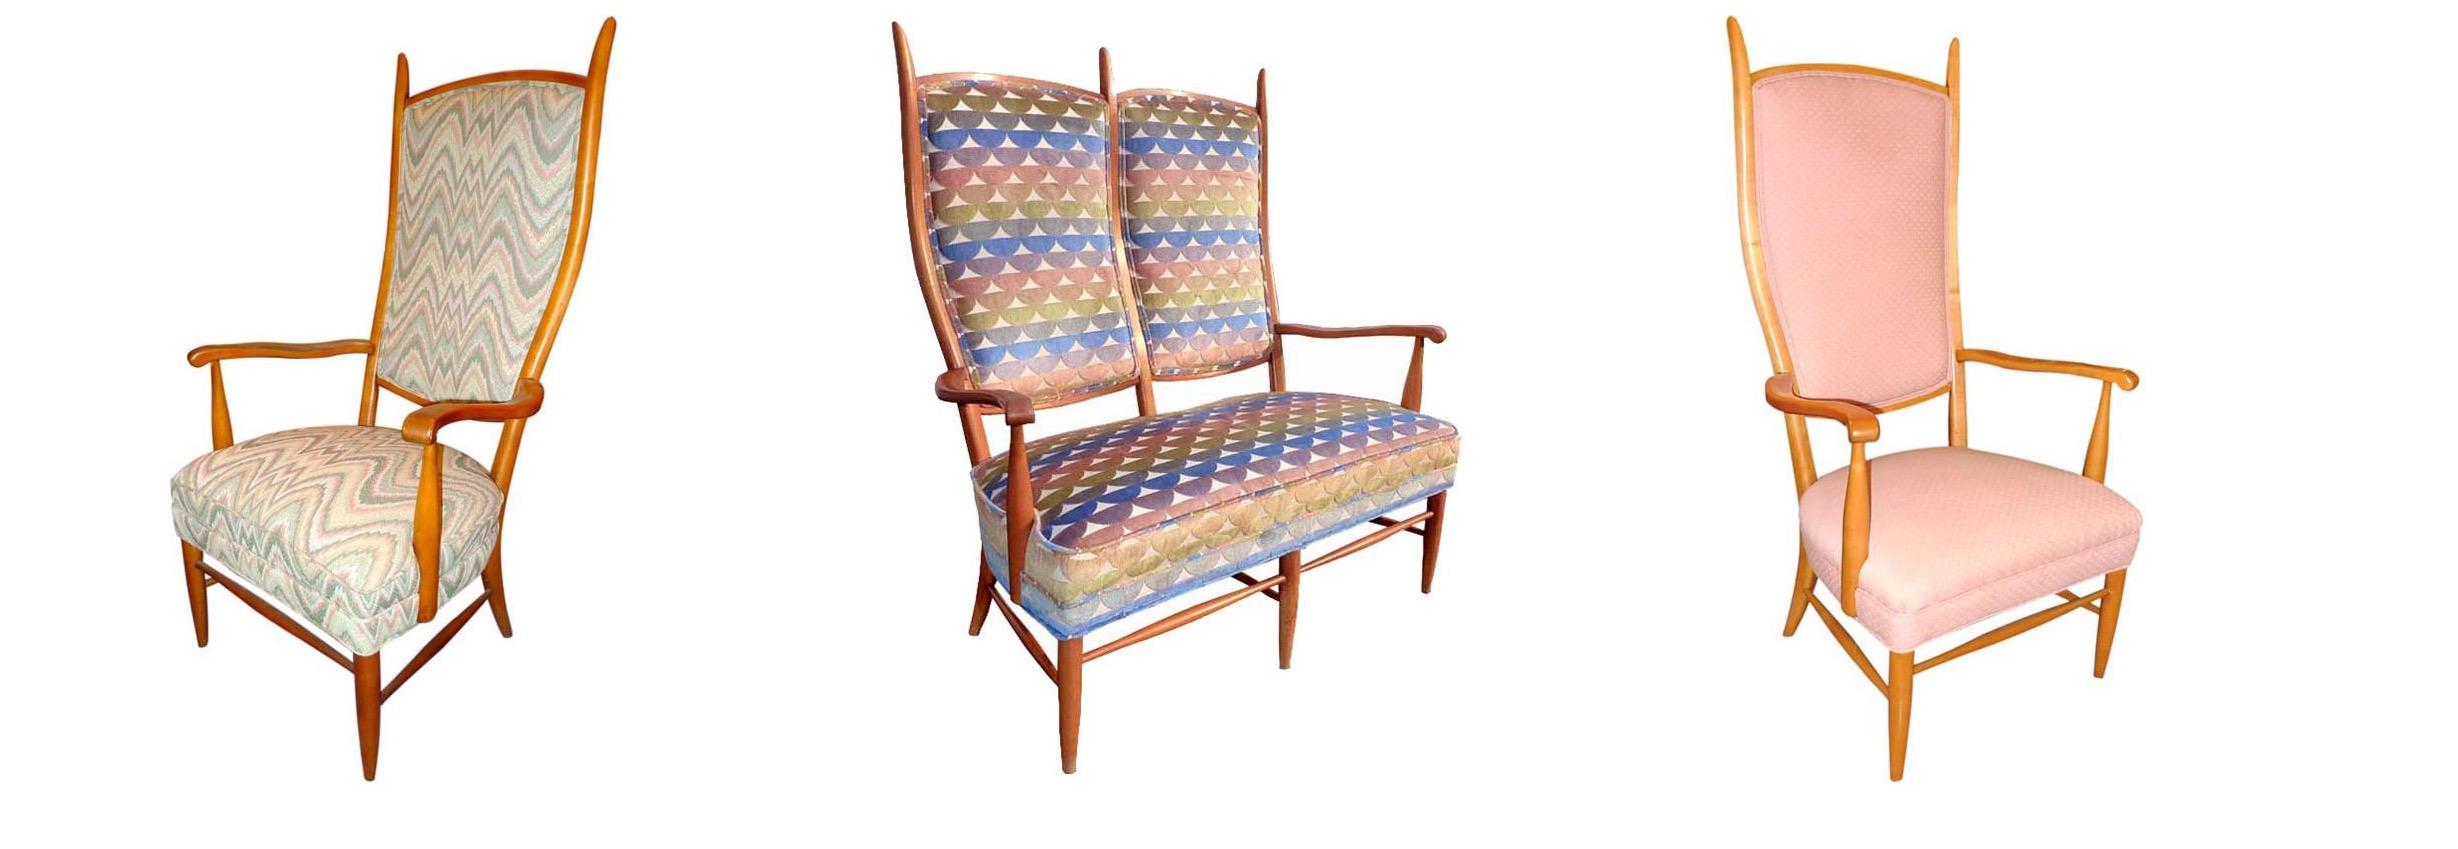 Three piece seating suite consisting of one high-back lithe two-seater vintage Italian style settee with elongated peak-formed rear supports and sinuous forward curling arms, and two armchairs.  

Made by Maxwell Royal of Hickory, NC in the